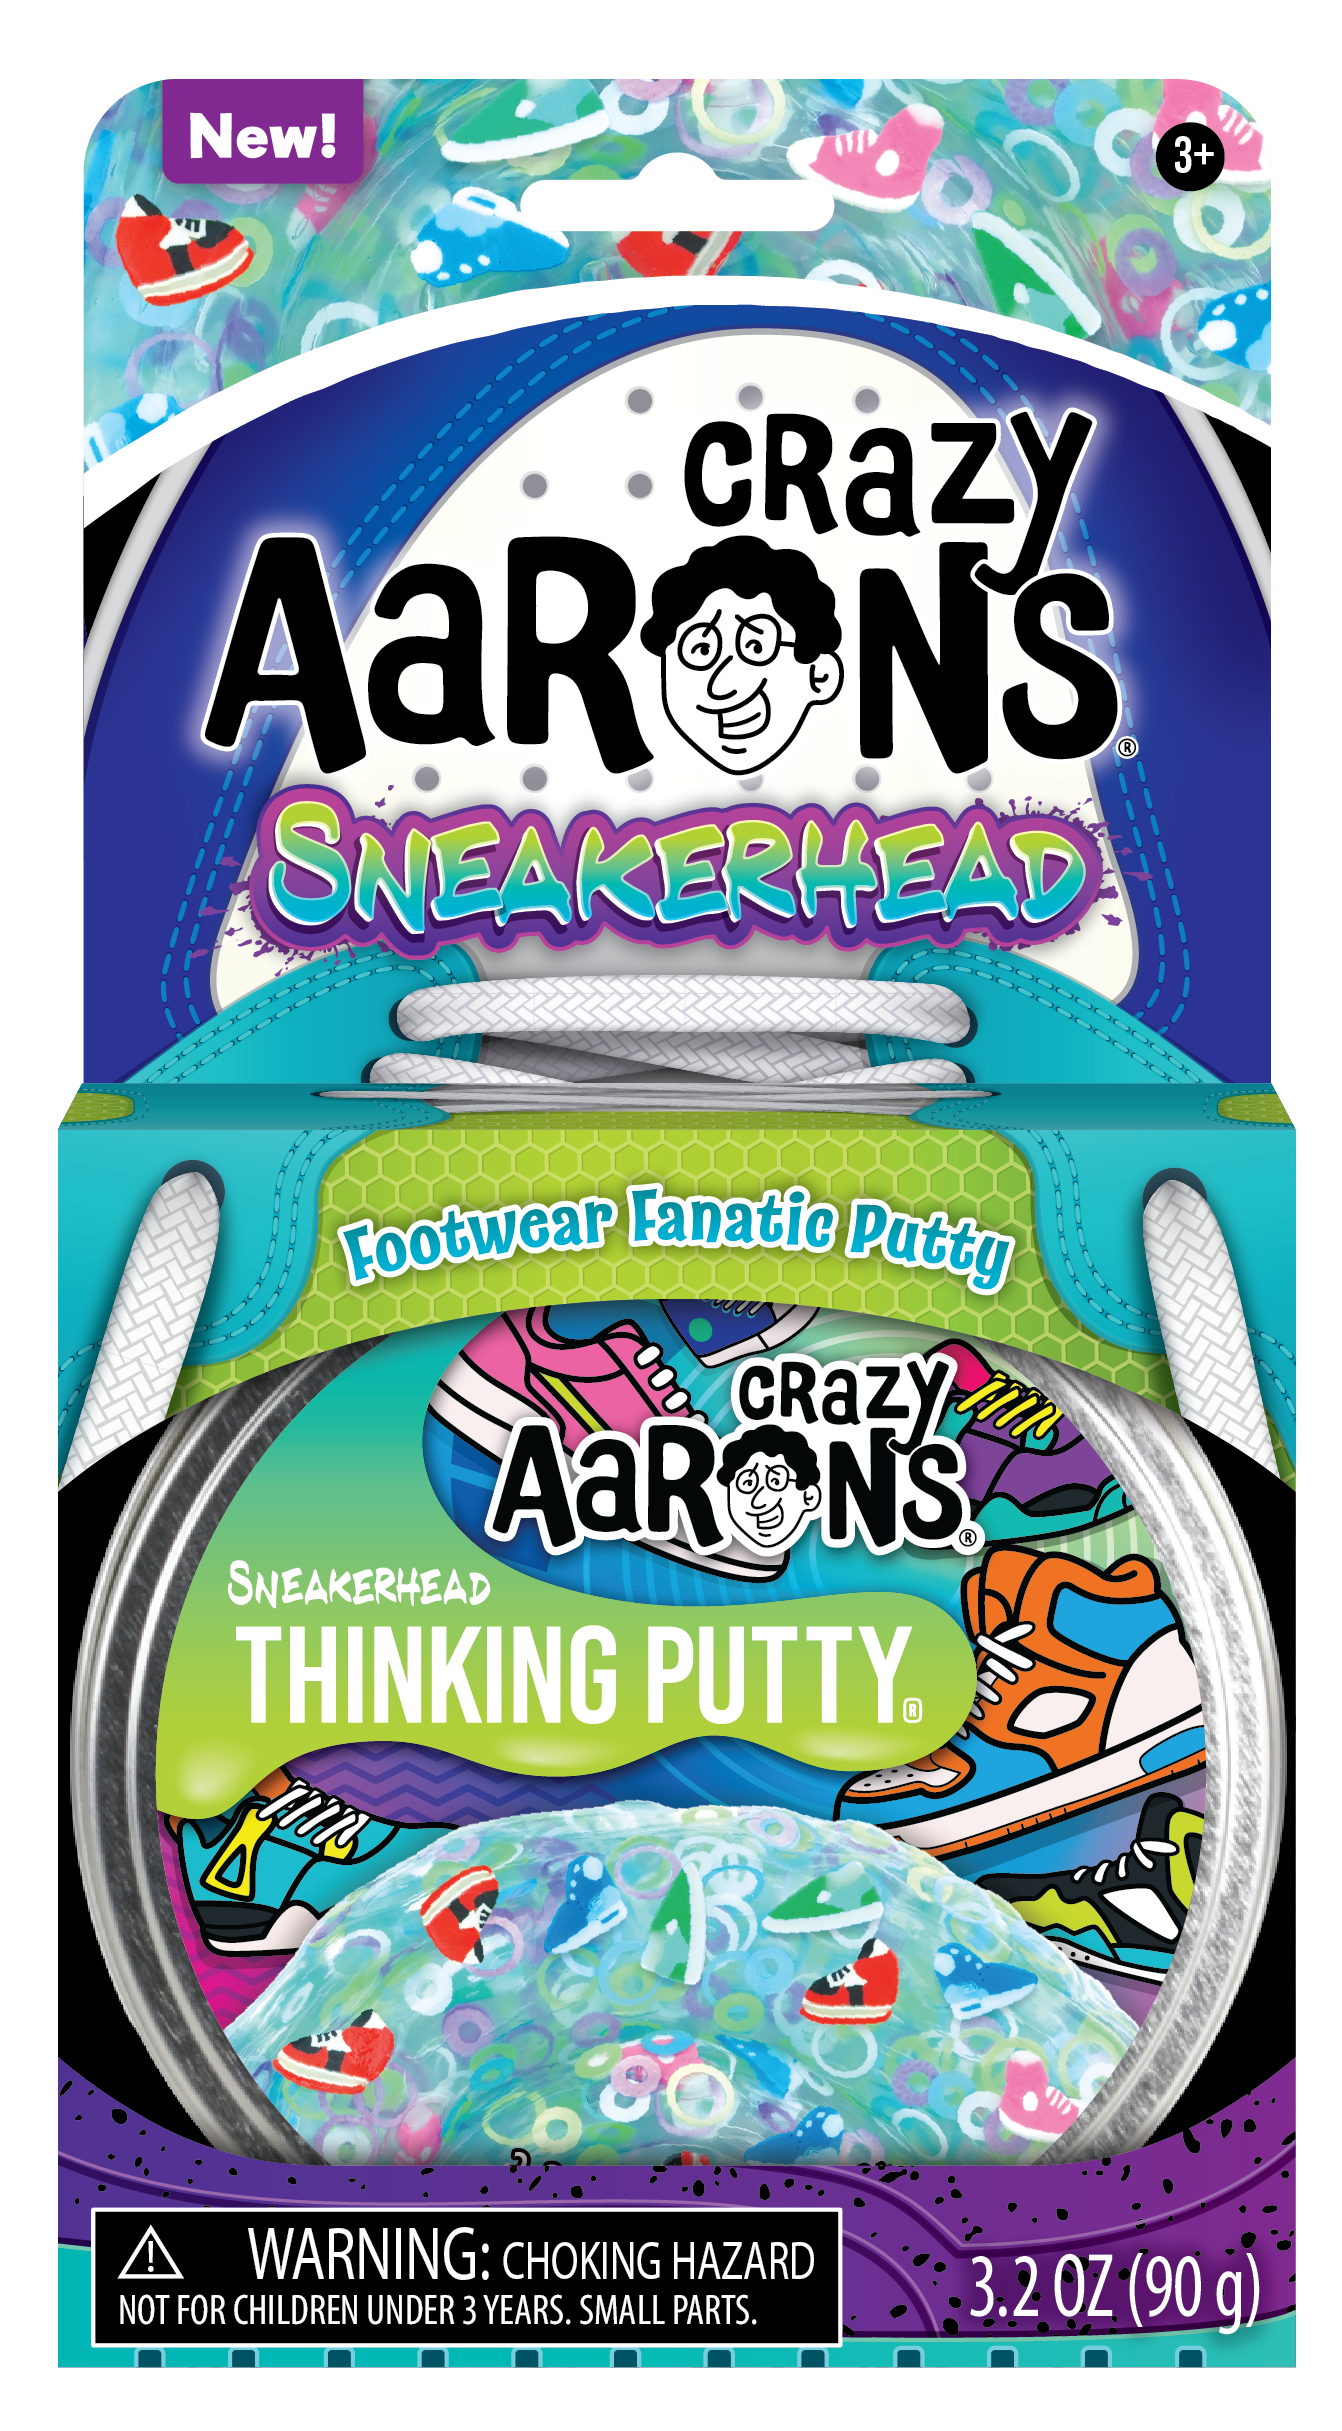 Sneaker Head 4” Thinking Putty by Crazy Aaron’s #NJ020